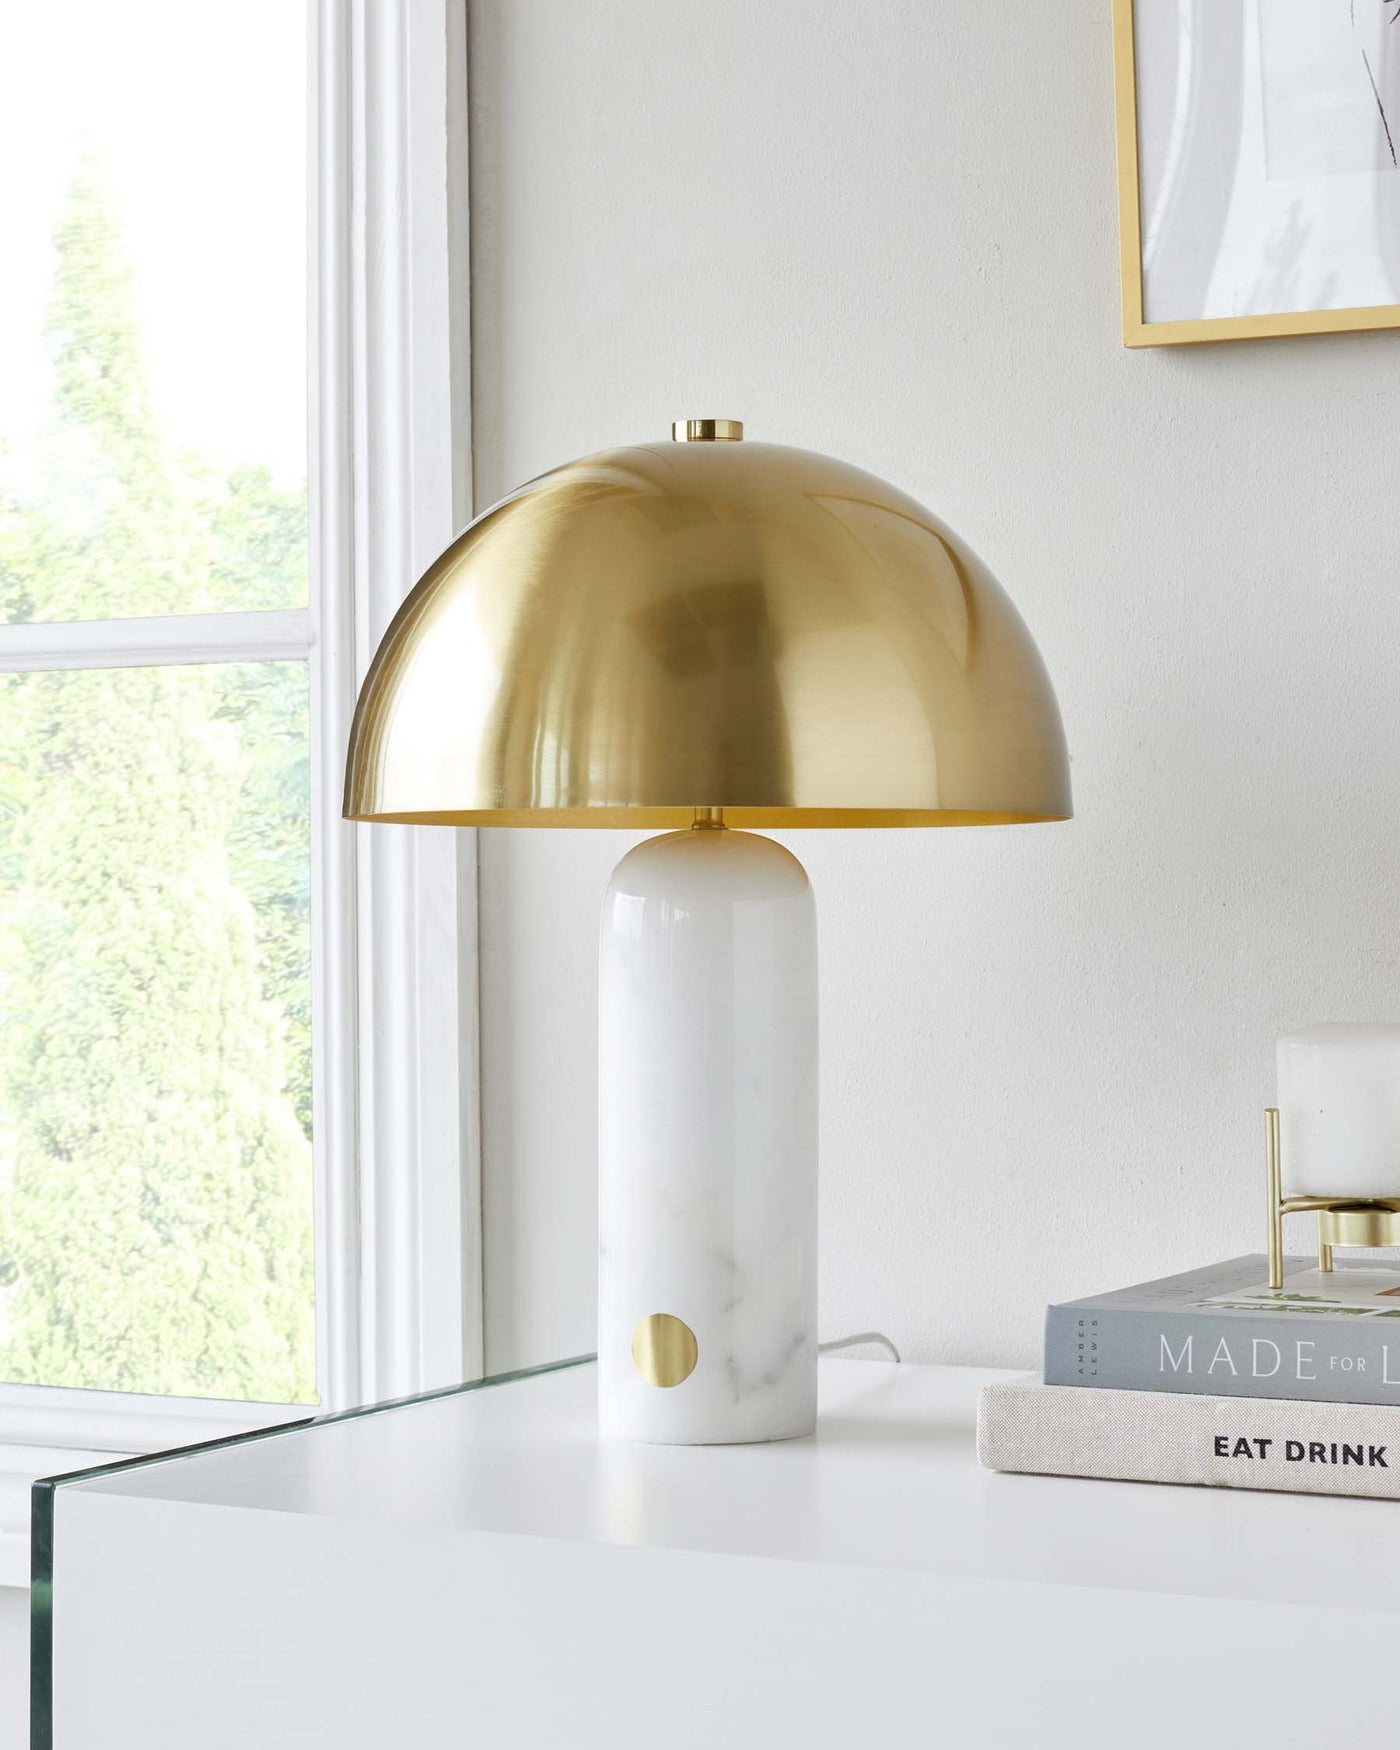 Elegant contemporary table lamp with a glossy brass dome shade and a cylindrical white marble base featuring a gold accent. Positioned on a sleek white tabletop beside a stack of hardcover books.